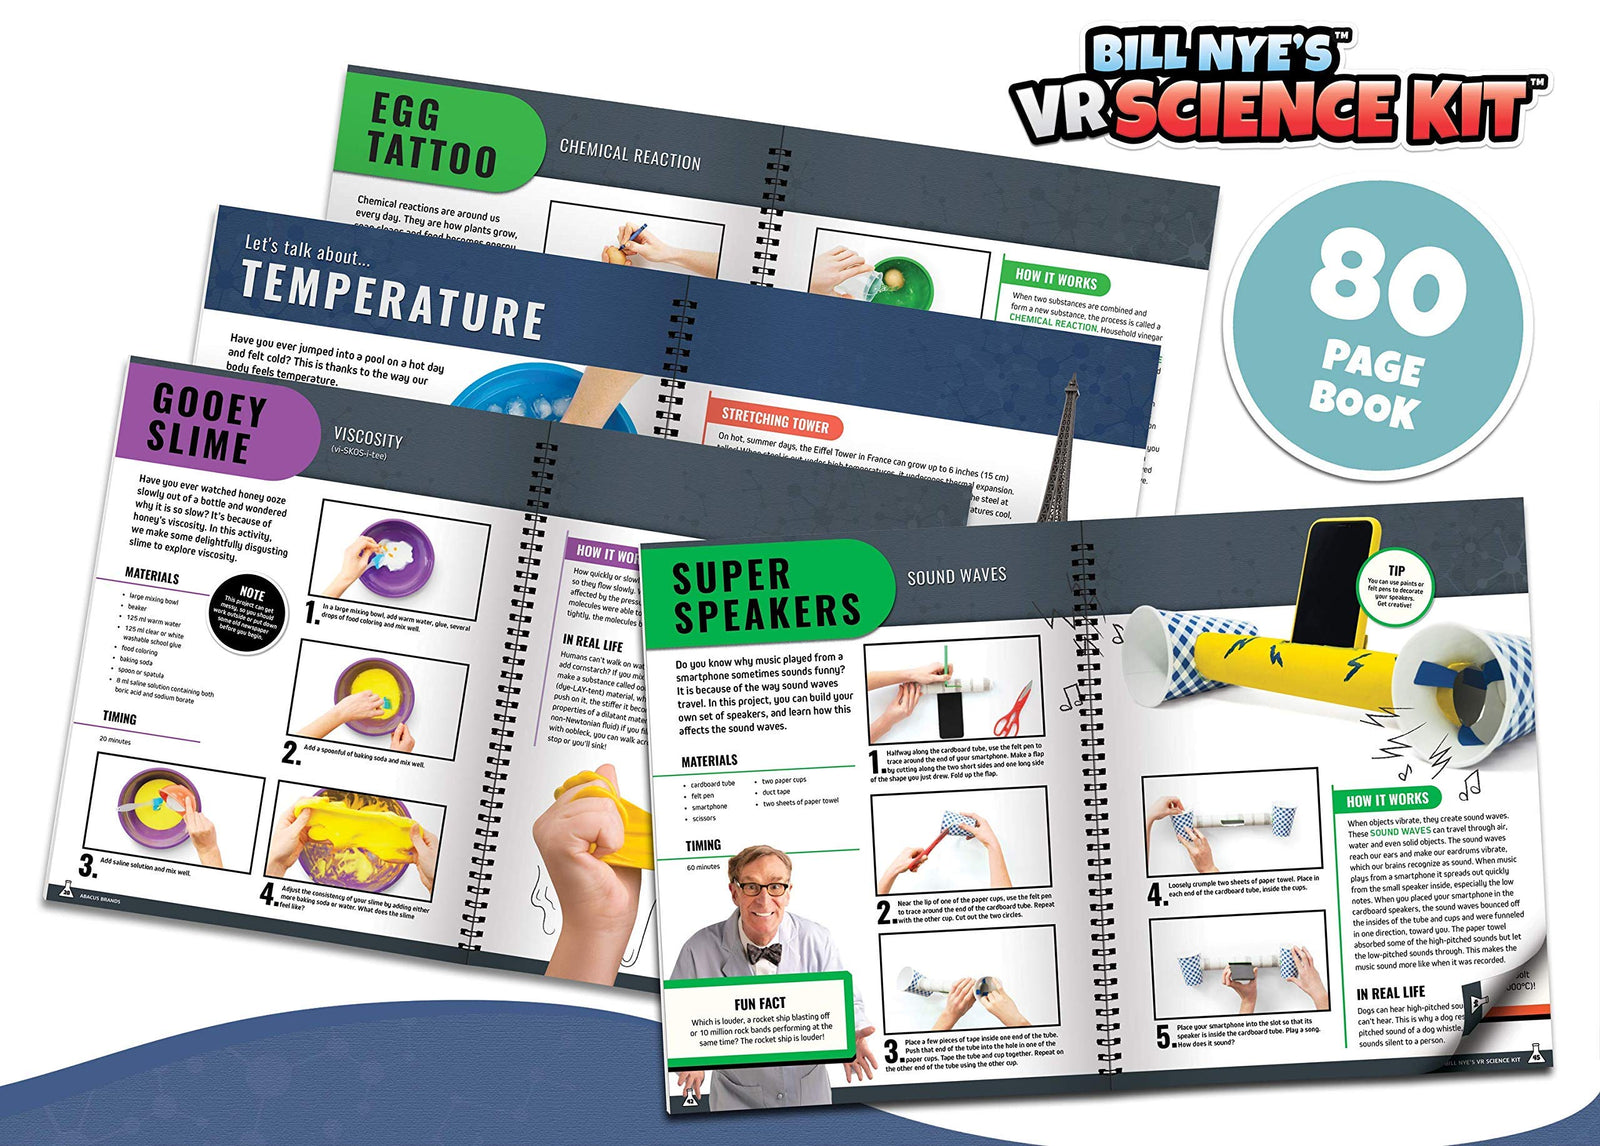 Abacus Brands Bill Nye's VR Science Kit - Virtual Reality Kids Science Kit, Book and Interactive STEM Learning Activity Set (Full Version - Includes Goggles)